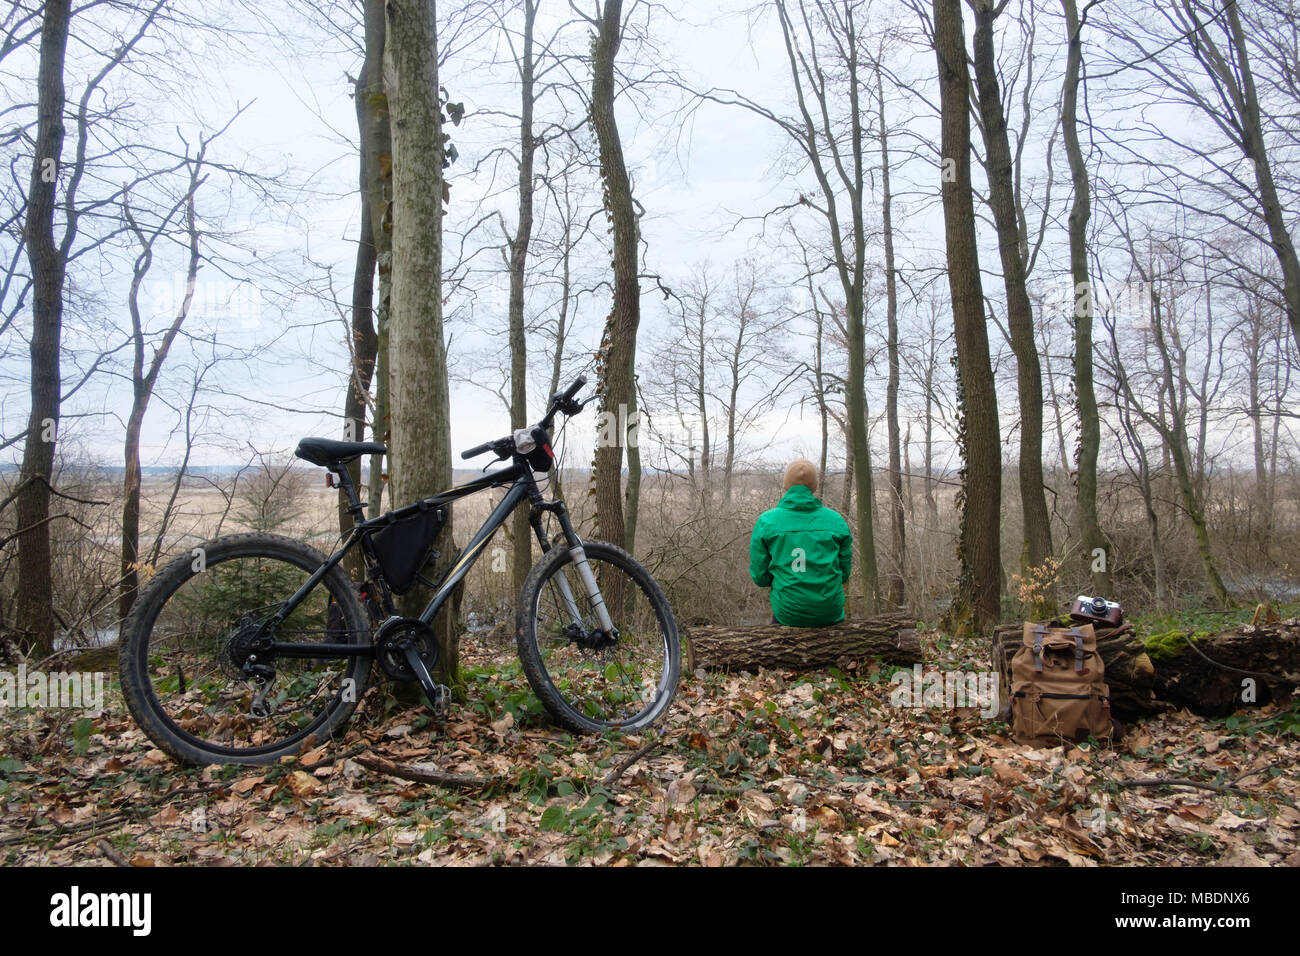 Man with bike in wild forest Stock Photo